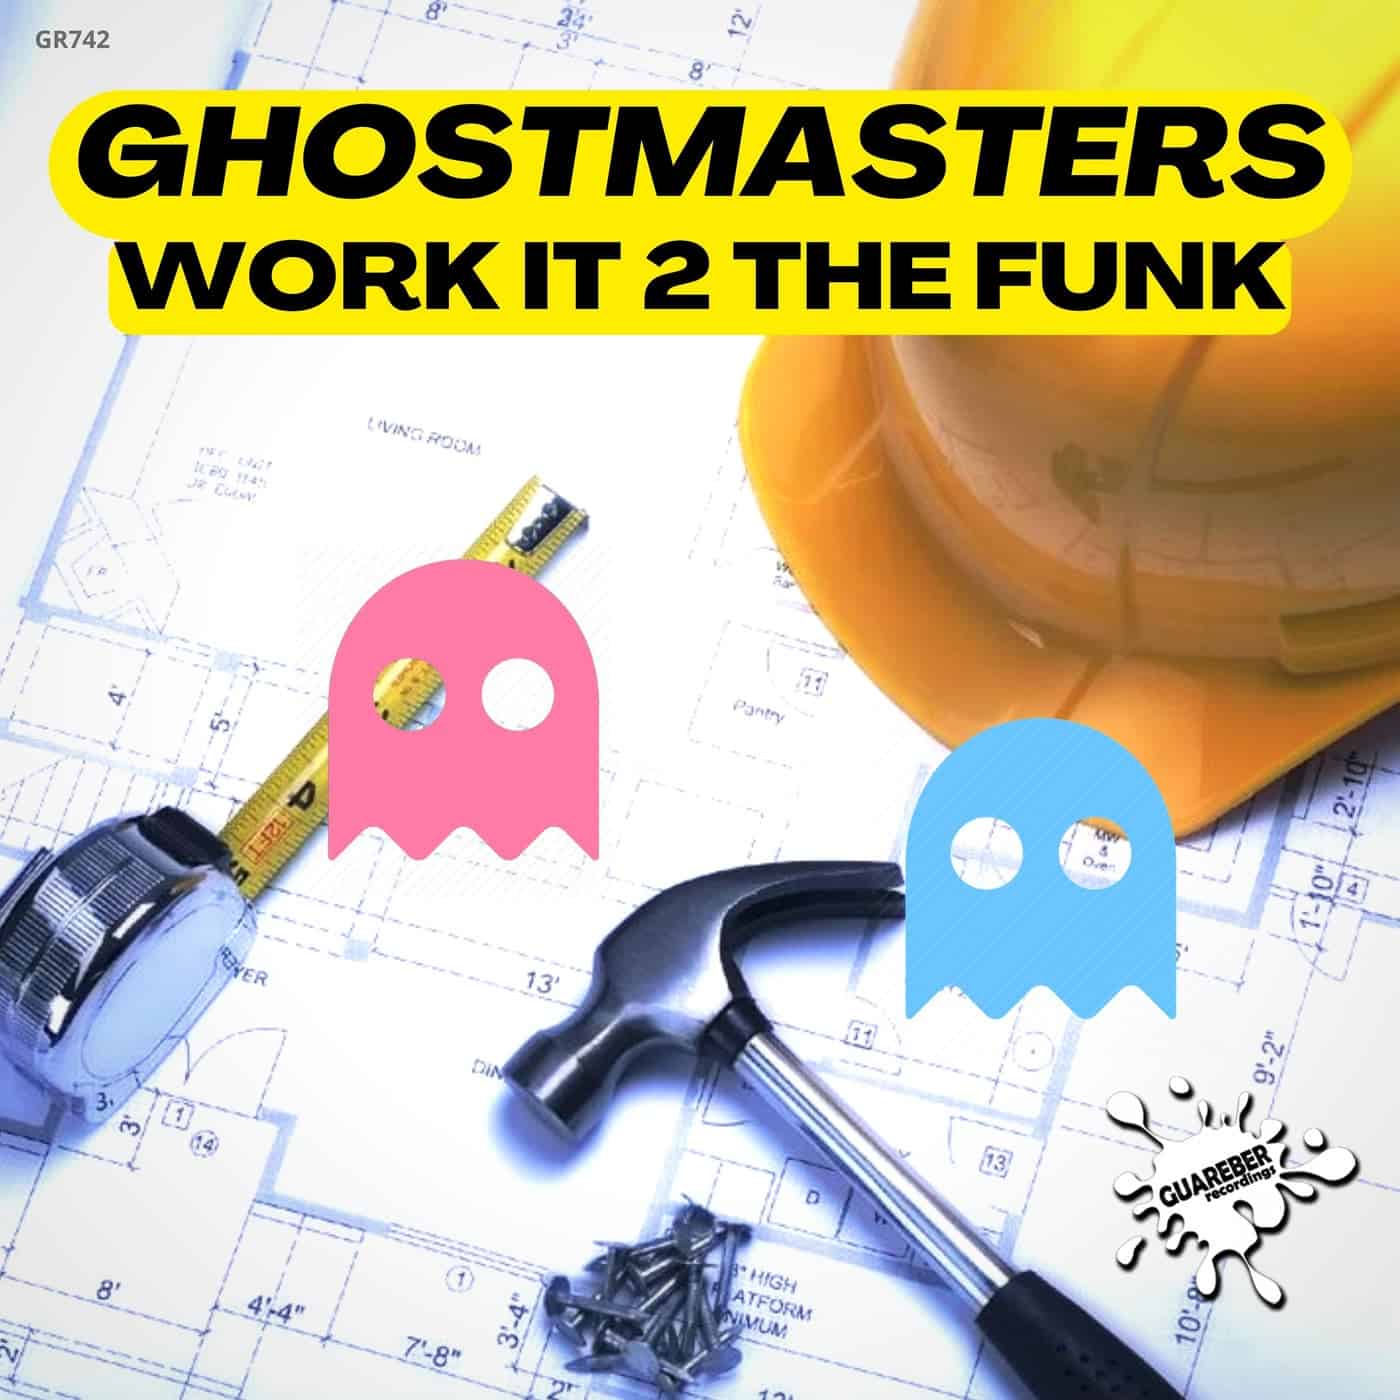 image cover: GhostMasters - Work it 2 The Funk / GR742